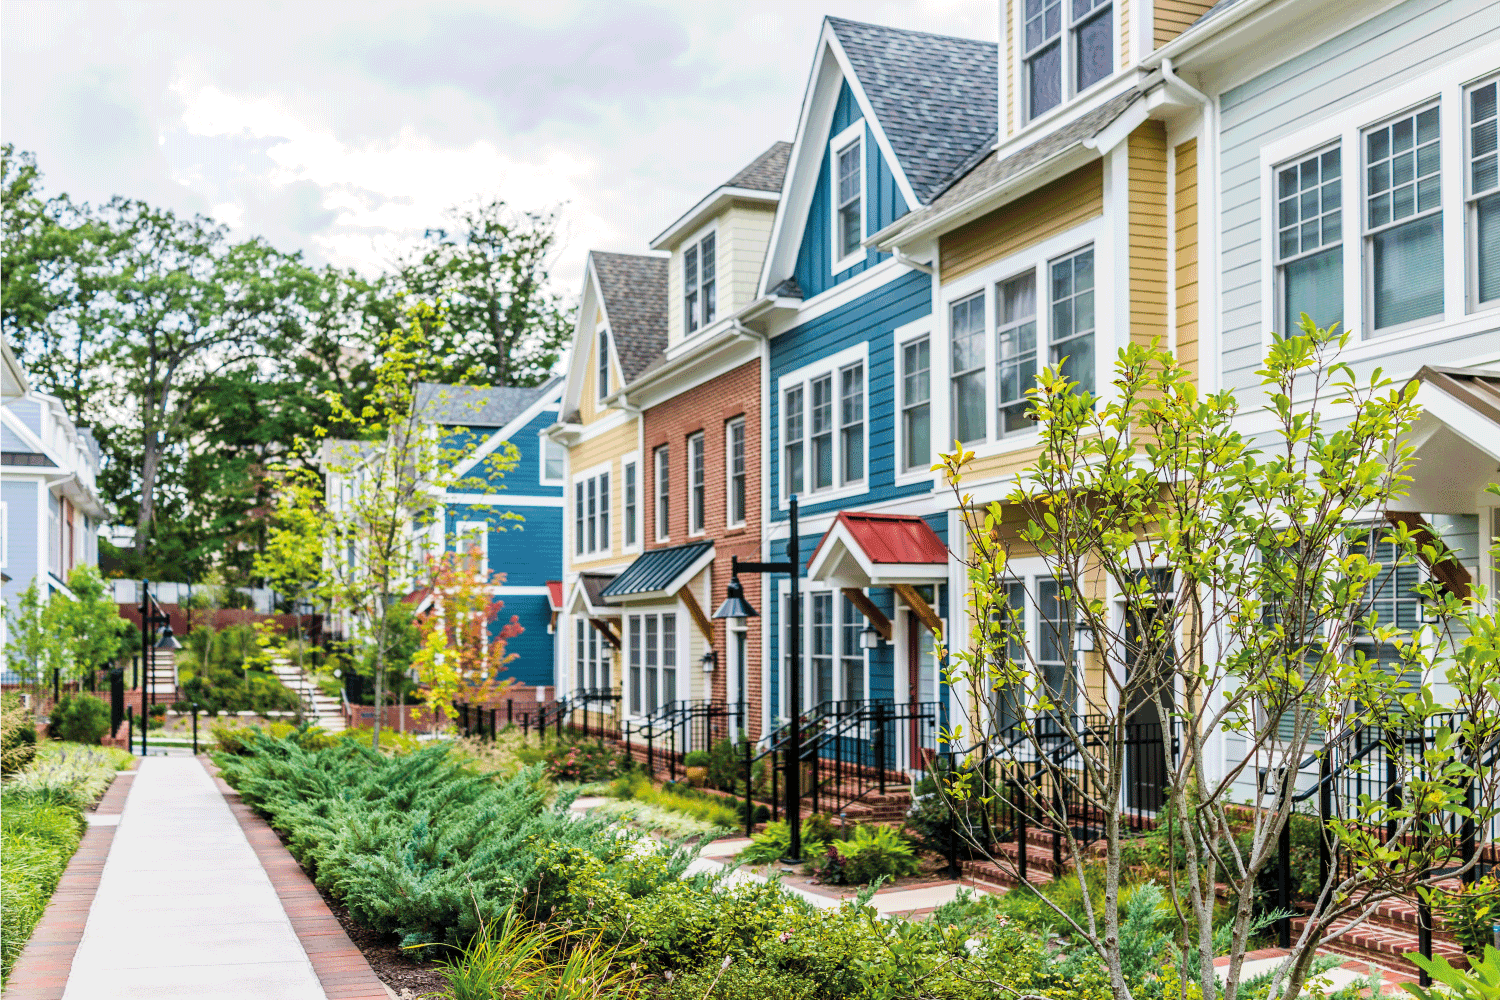 Row of colorful, red, yellow, blue, white, green painted residential townhouses, homes, houses with brick patio gardens